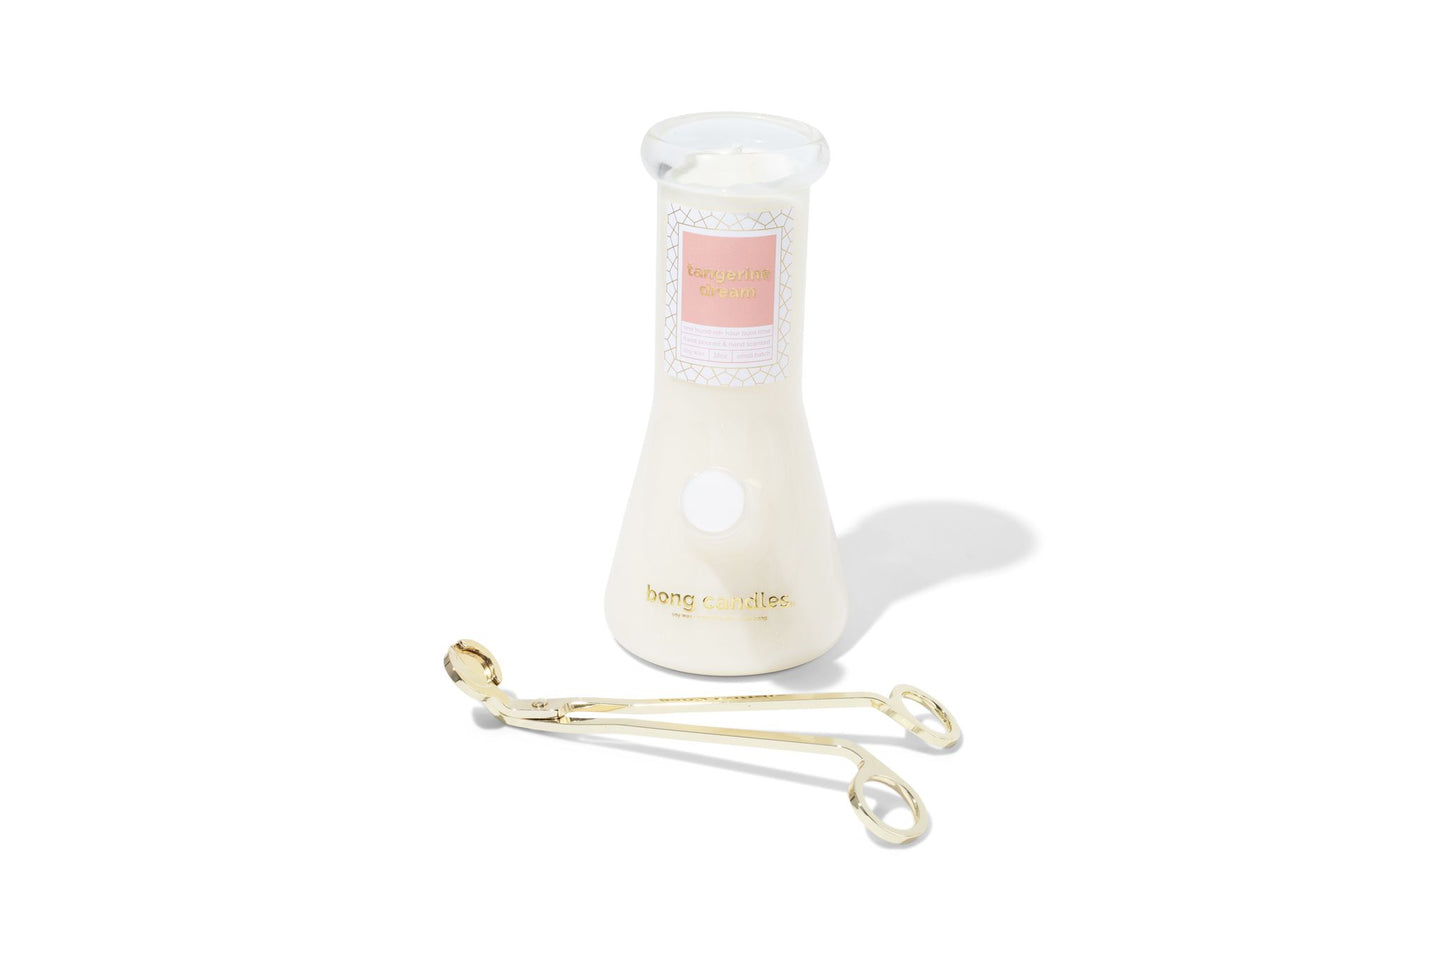 bong candles wick trimmer -  gold candle accessories